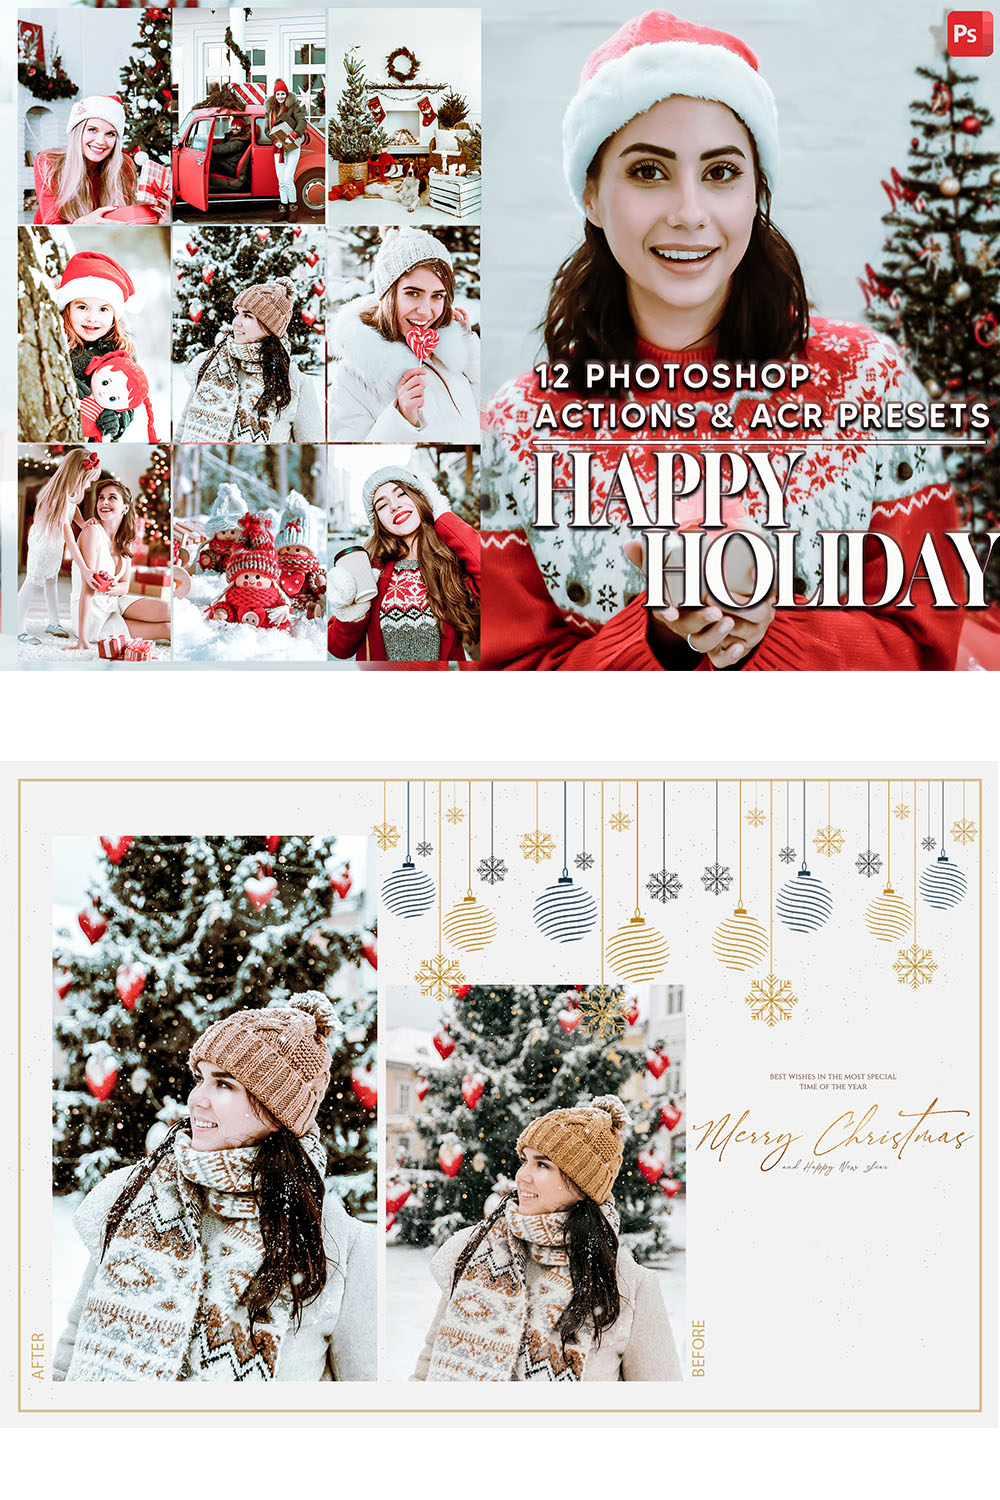 12 Photoshop Actions, Happy Holiday Ps Action, Christmas ACR Preset, Xmas Ps Filter, Atn Portrait And Lifestyle Theme For Instagram, Blogger pinterest preview image.